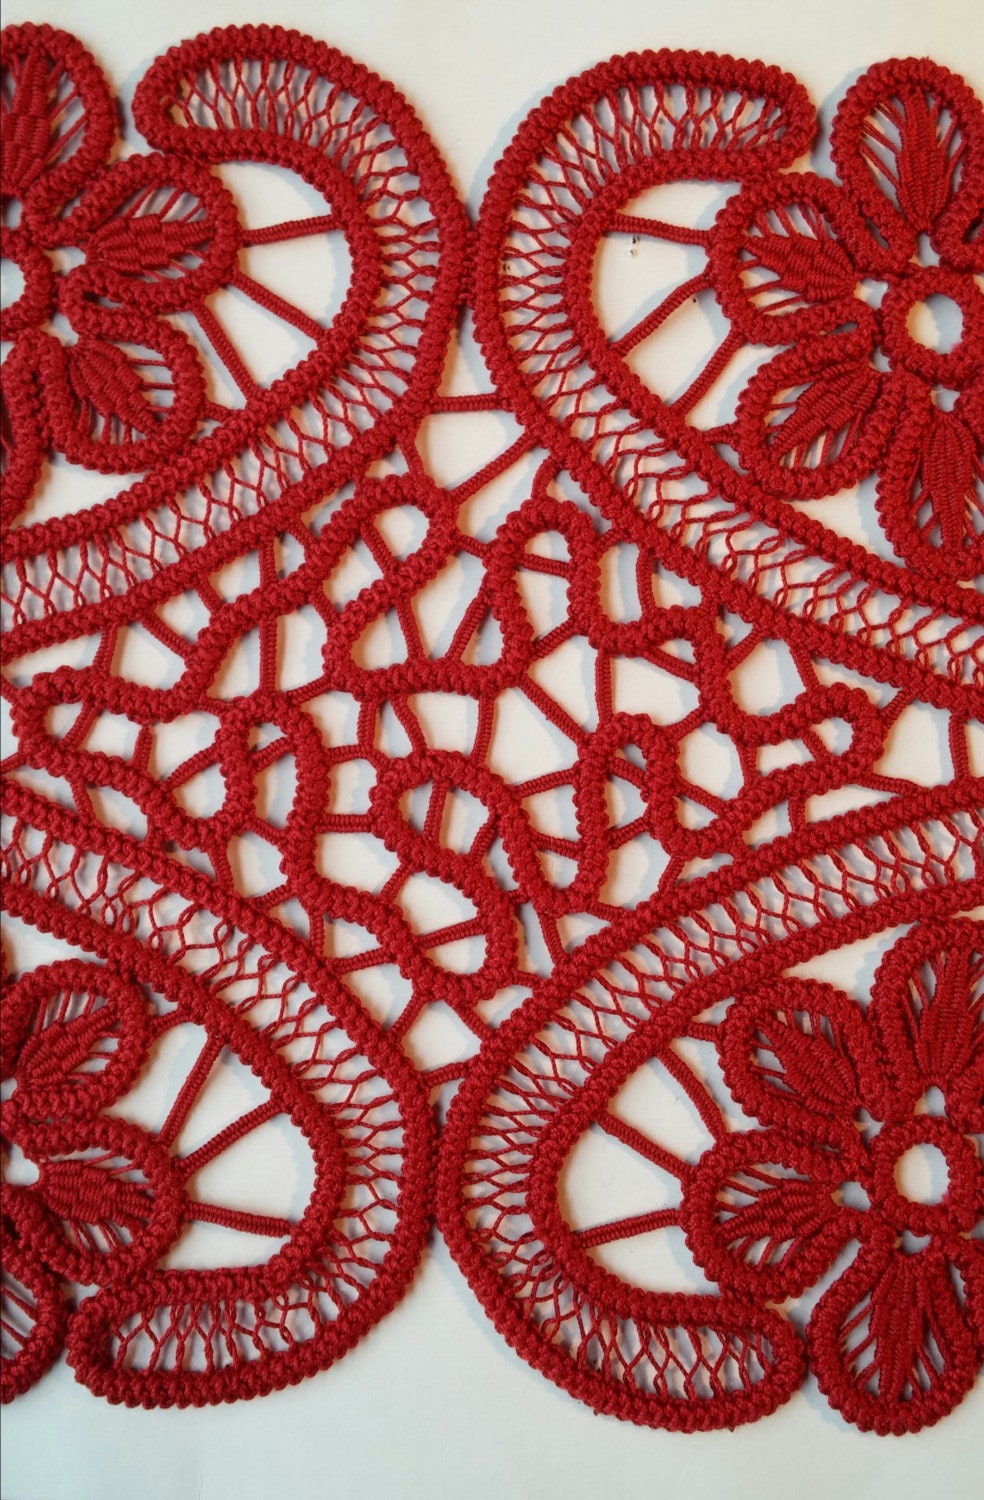 Table Runner Romanian Point Lace Crochet Doily Red by ValeriasShop